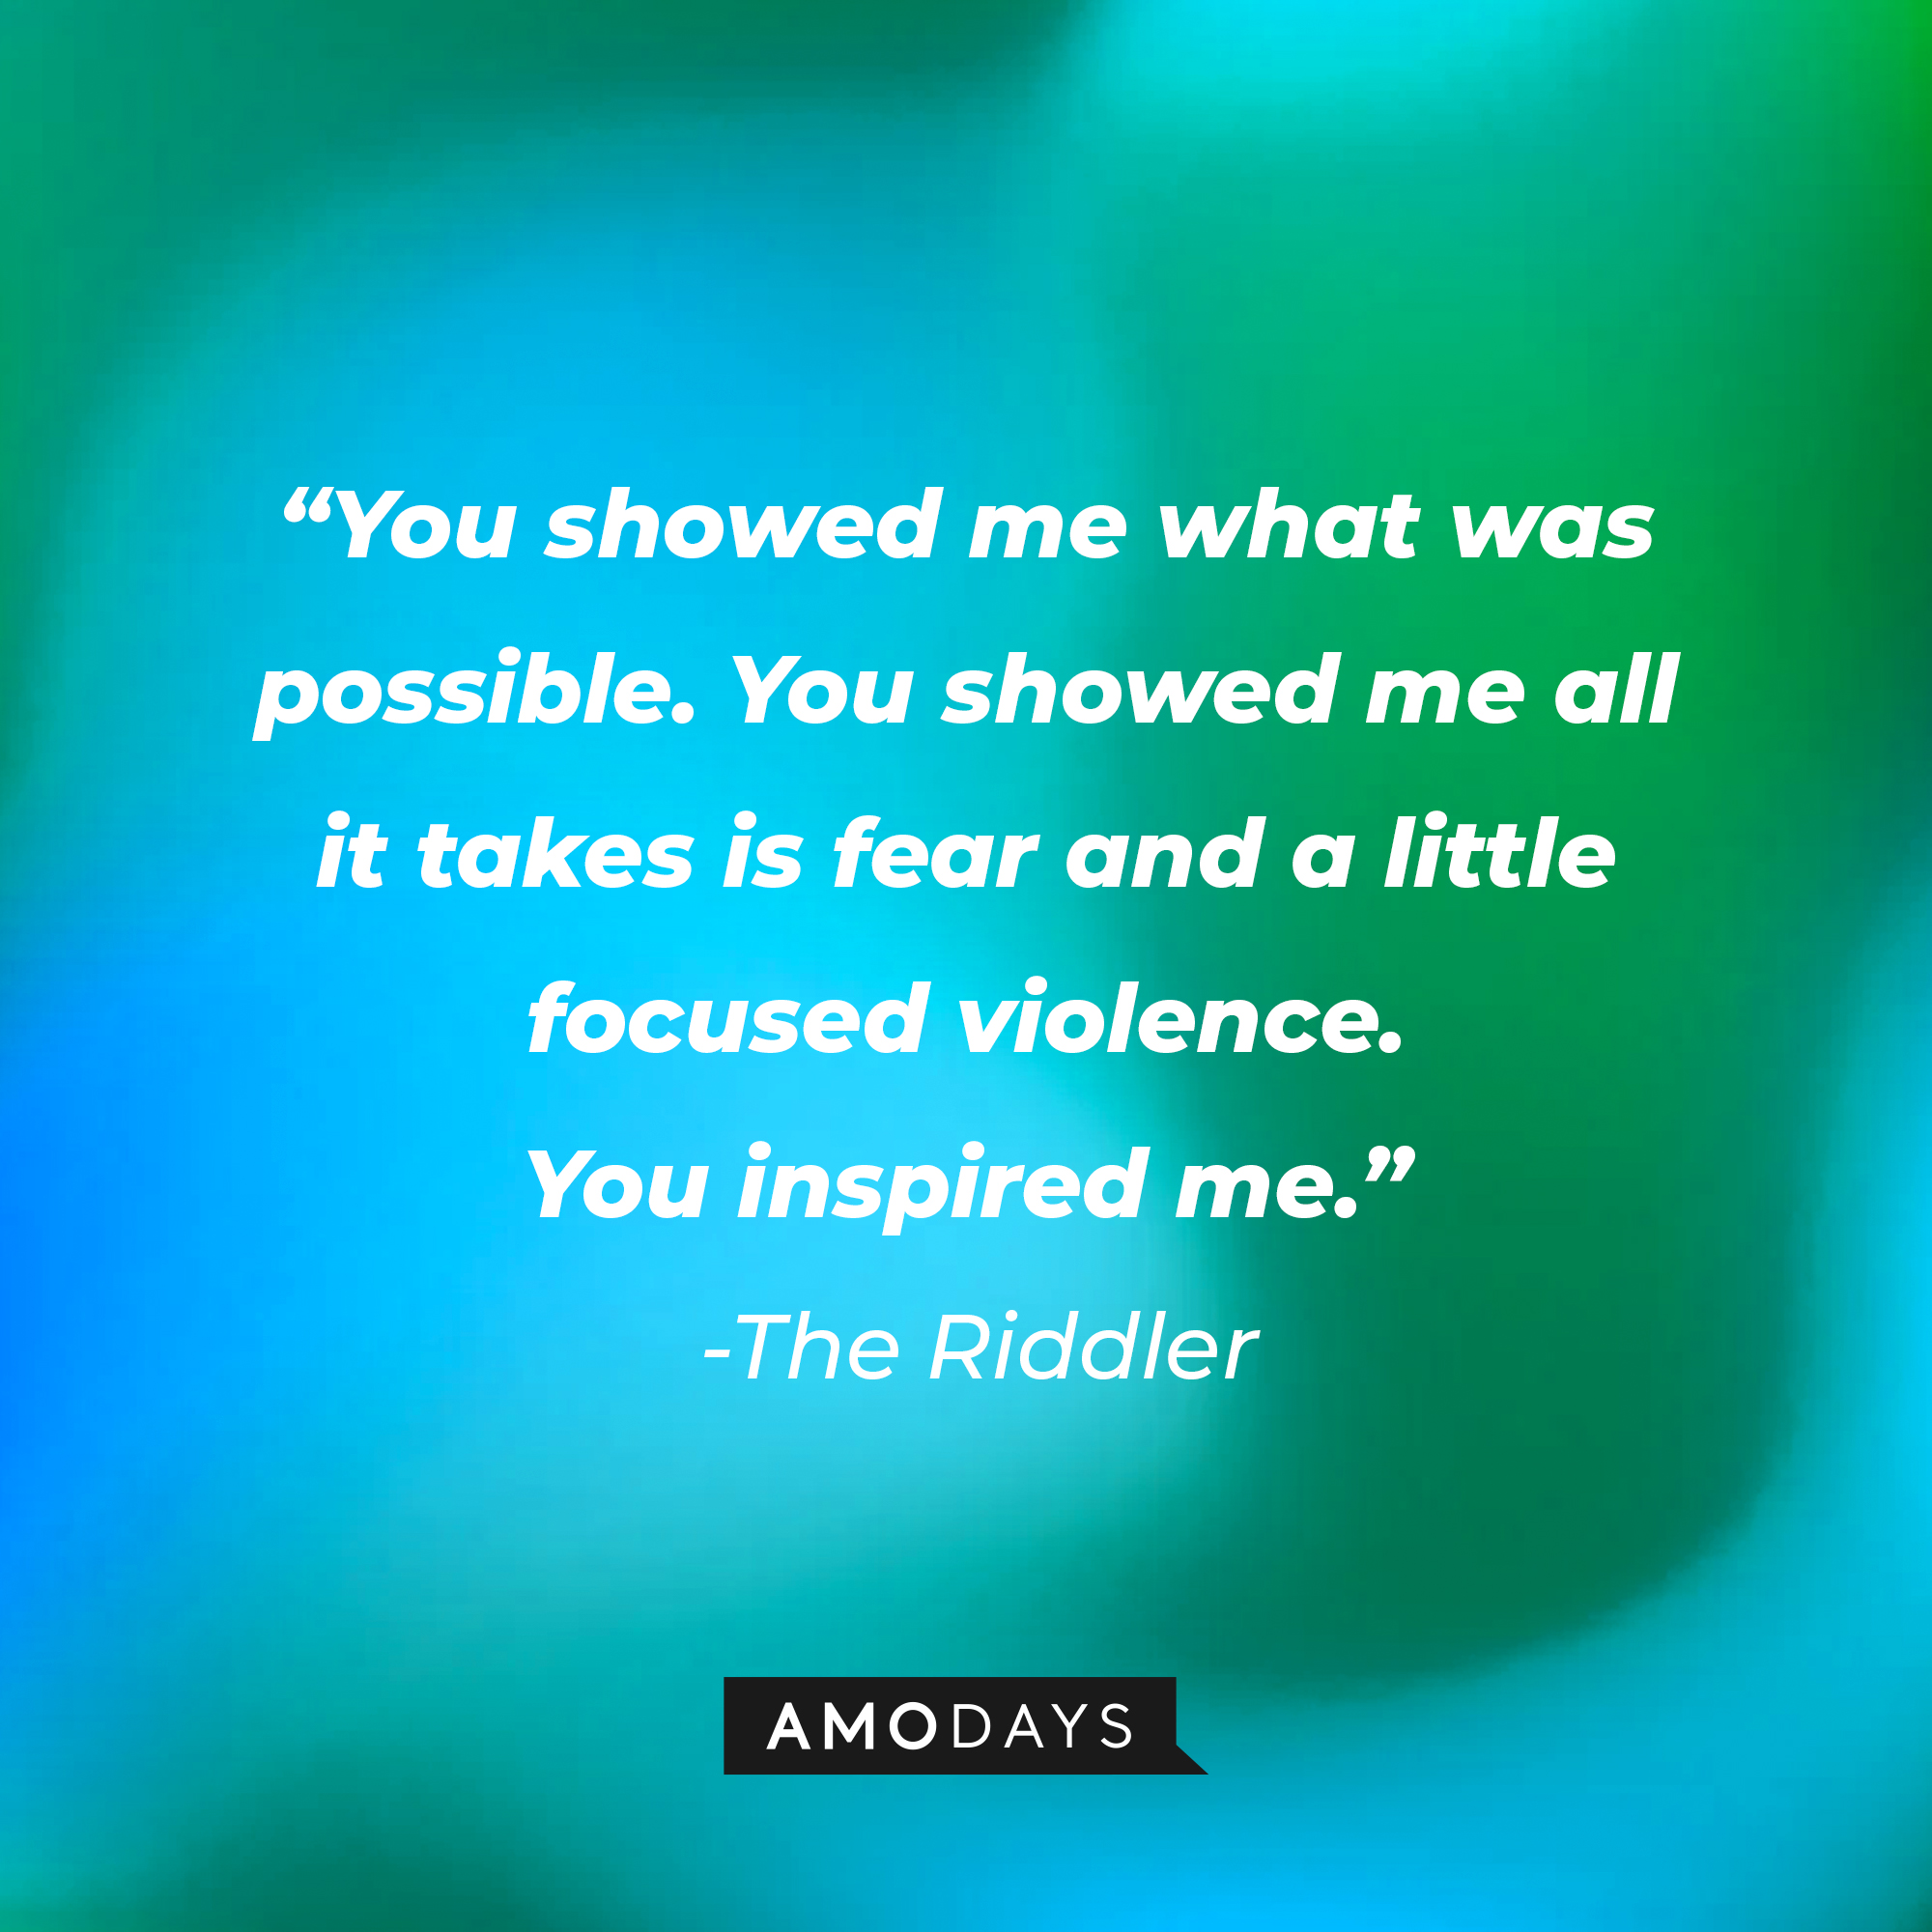 The Riddler's quote: “You showed me what was possible. You showed me all it takes is fear and a little focused violence. You inspired me.” | Amodays